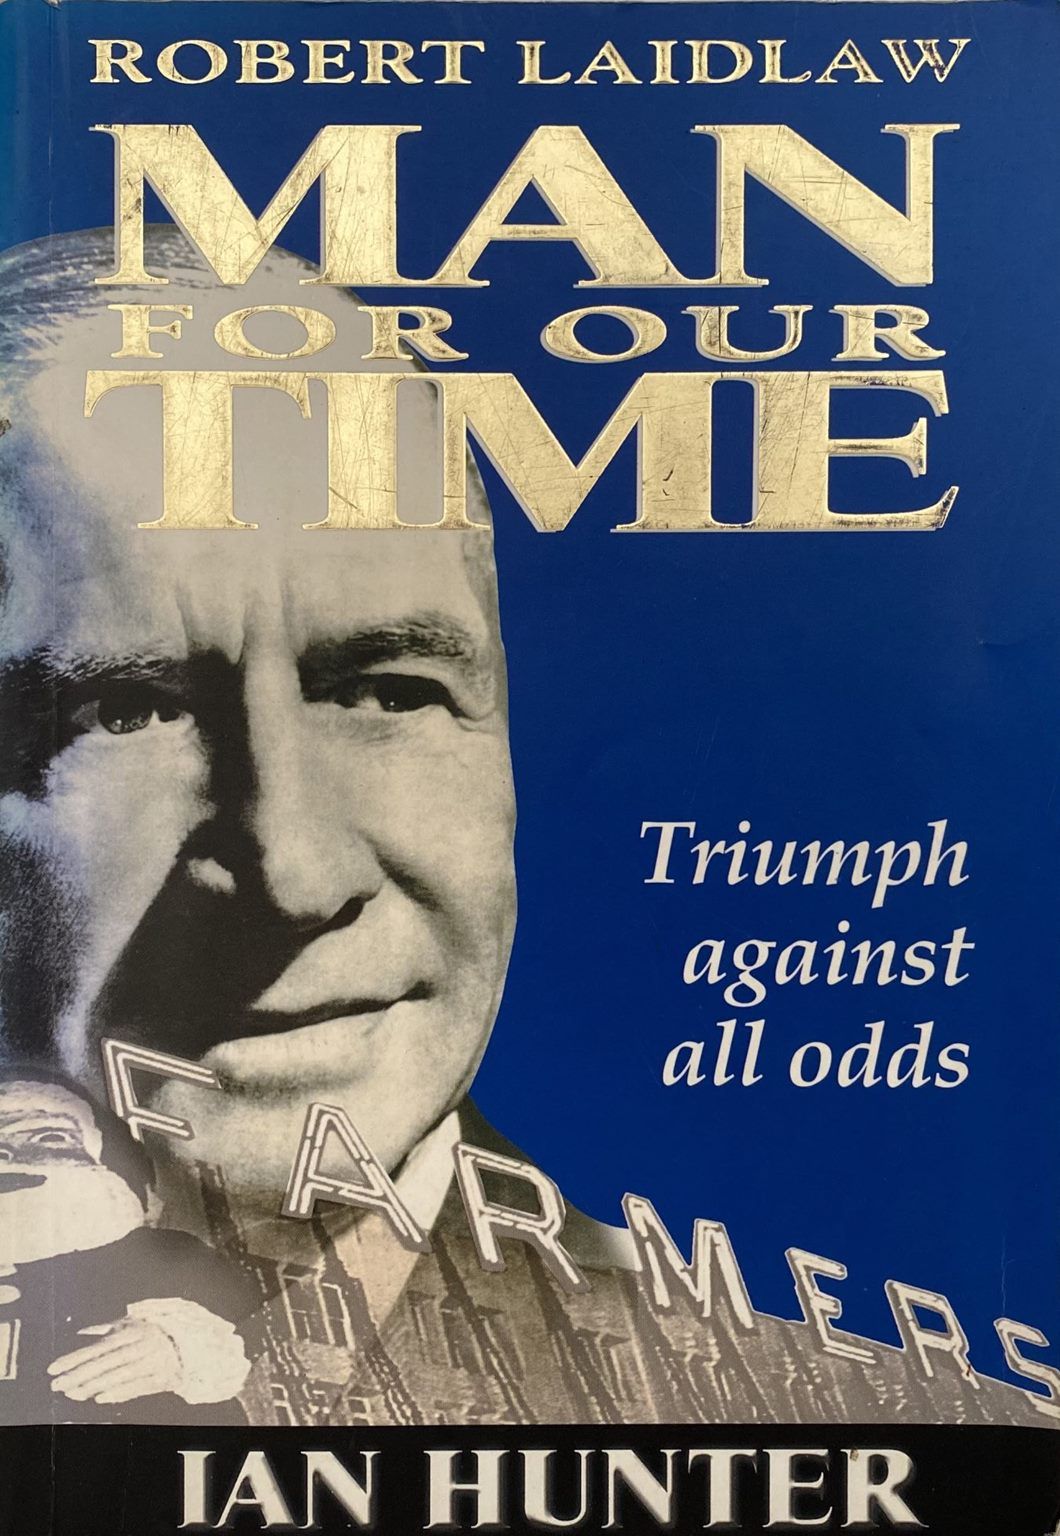 Robert Laidlaw MAN FOR OUR TIME: Triumph against all odds by Ian Hunter